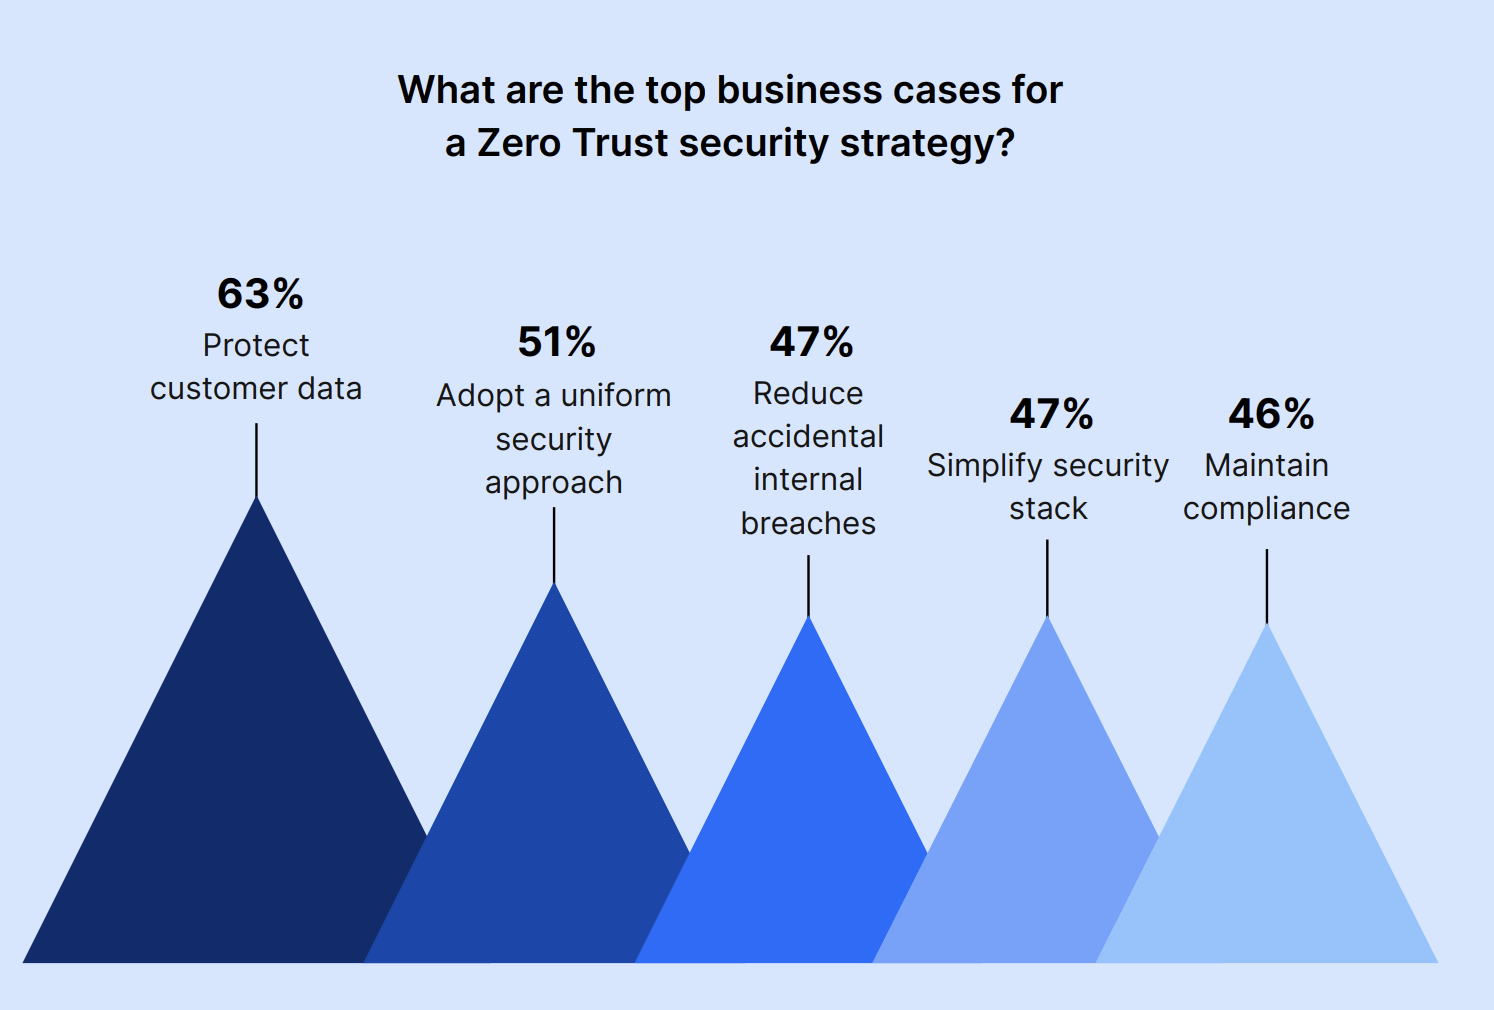 What are the top business cases for a Zero Trust security strategy?